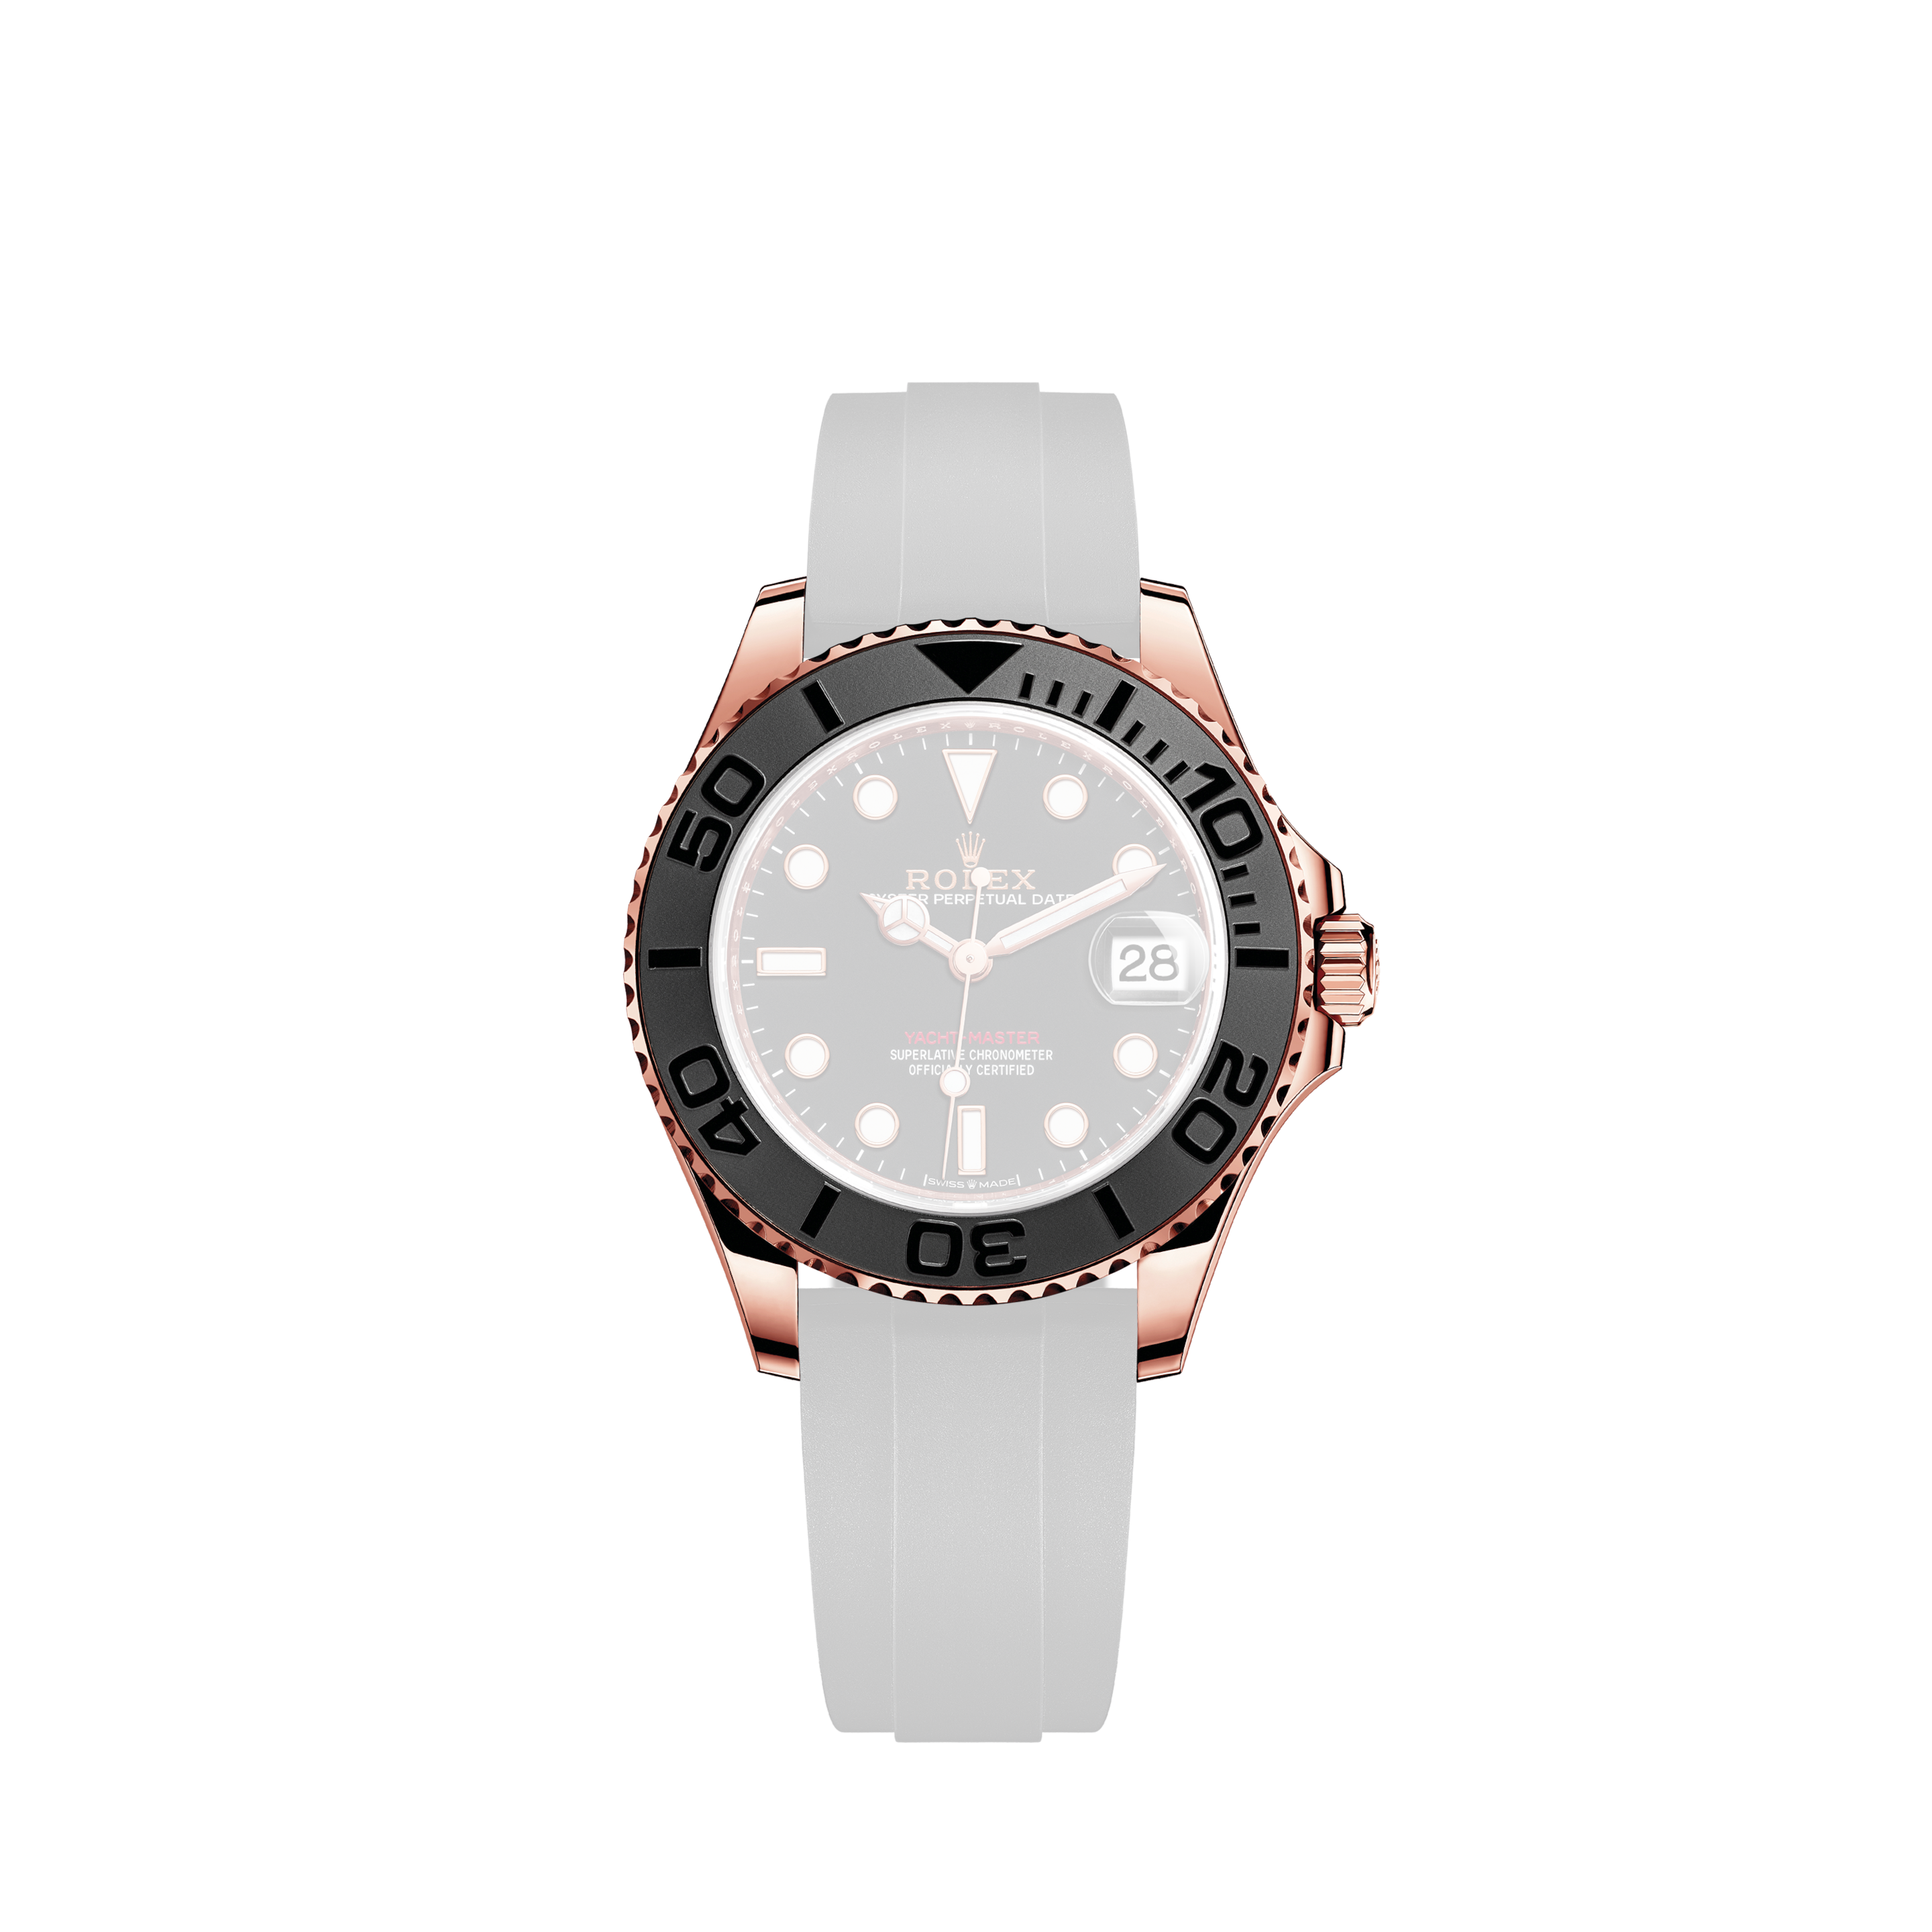 Rolex Datejust 36mm Stainless Steel and Rose Gold 126281RBR Jubilee Chocolate Diamond JubileeRolex Datejust 36mm Stainless Steel and Rose Gold 126281RBR Jubilee Chocolate Diamond Oyster